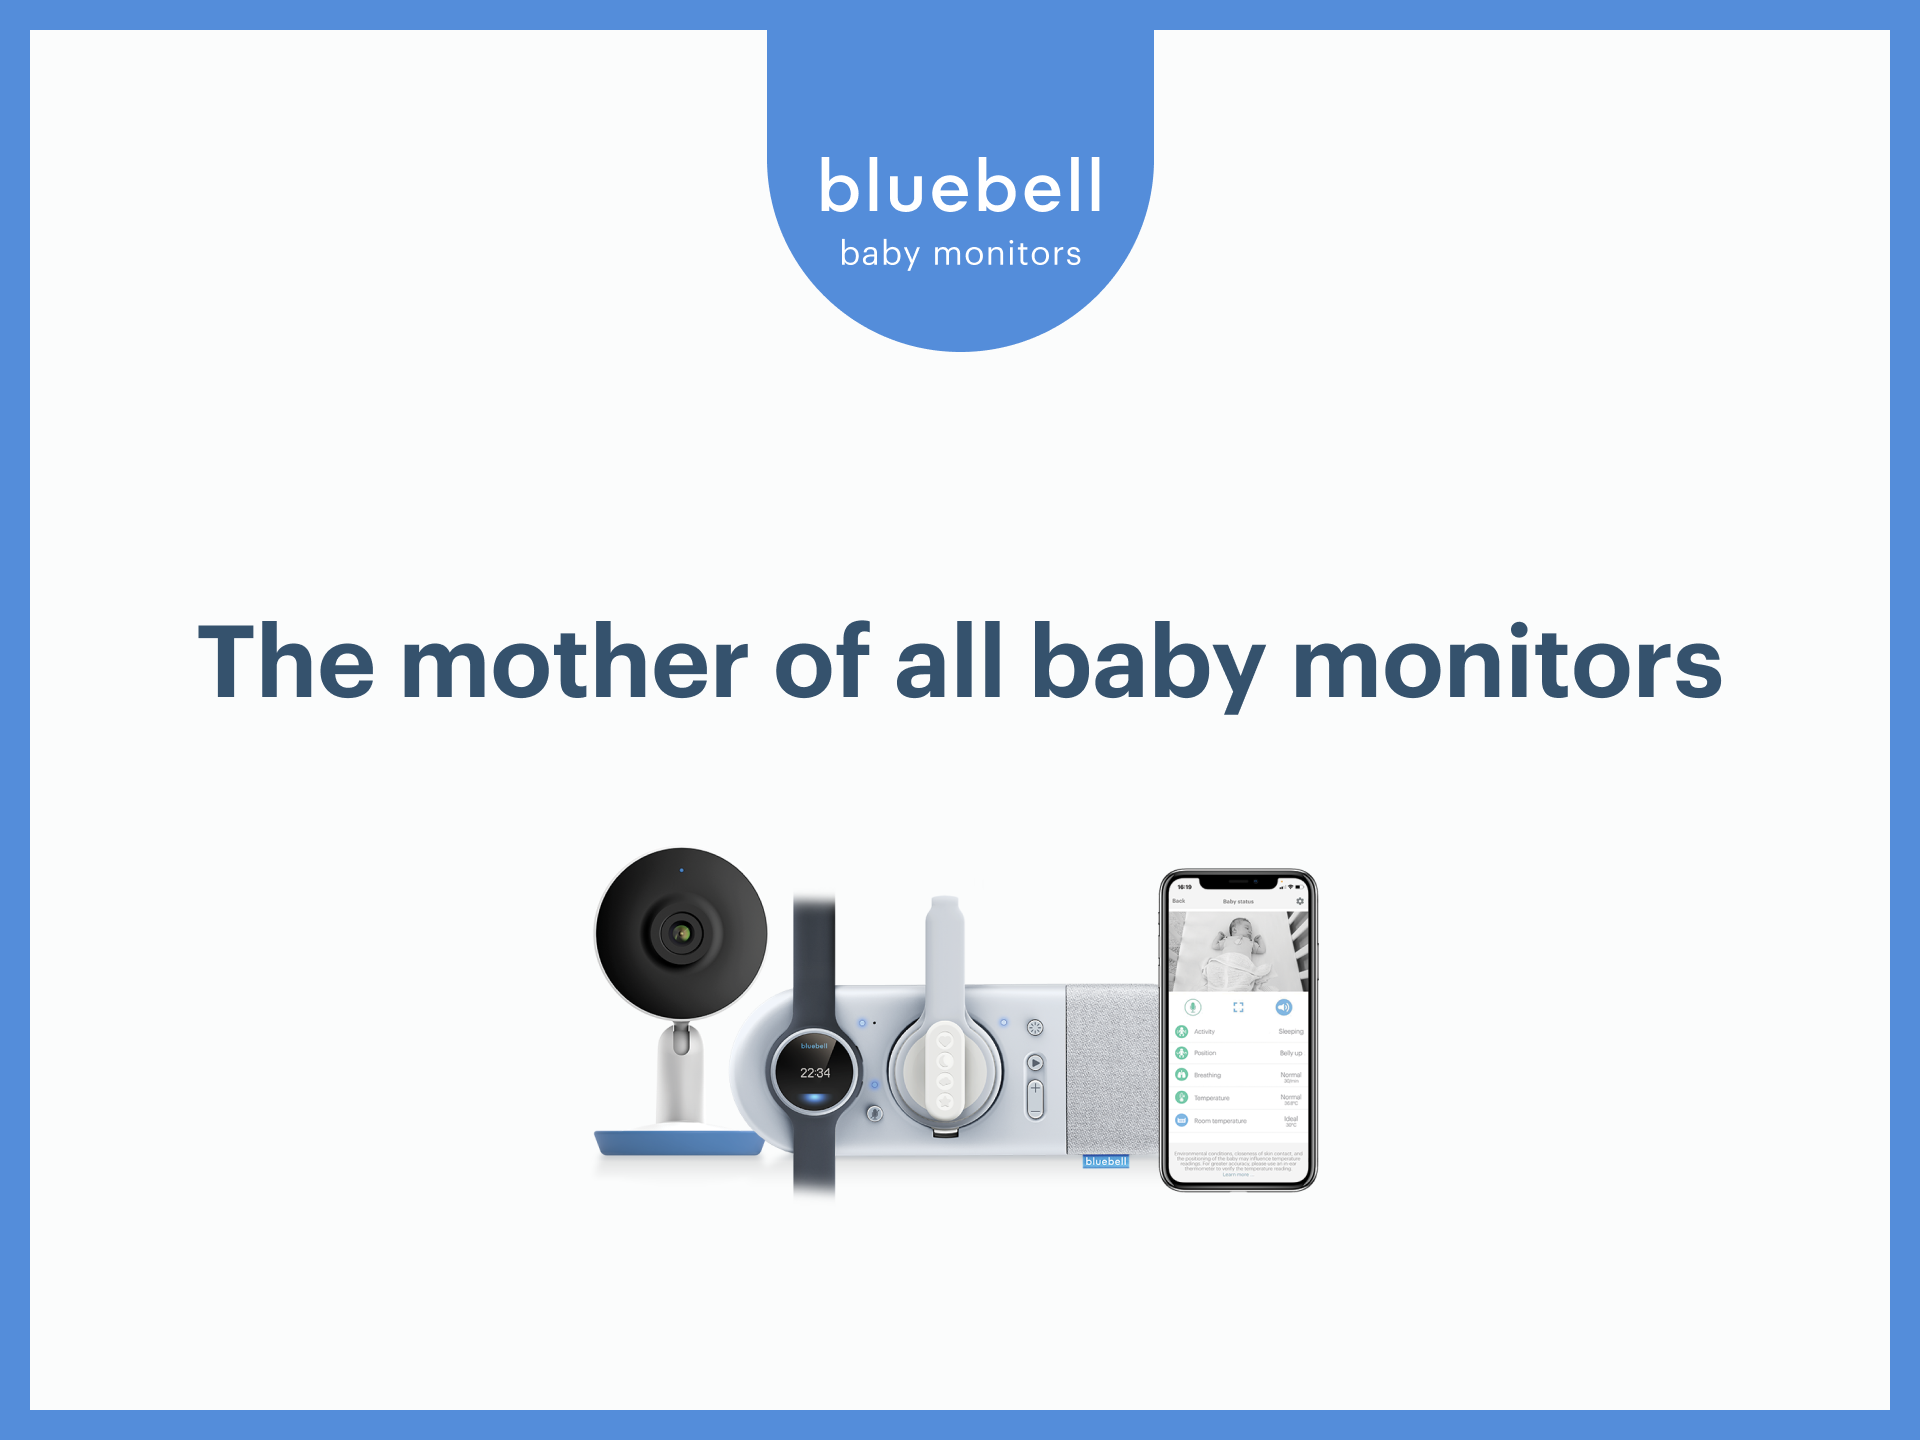 the mother of all baby monitors is bluebell .